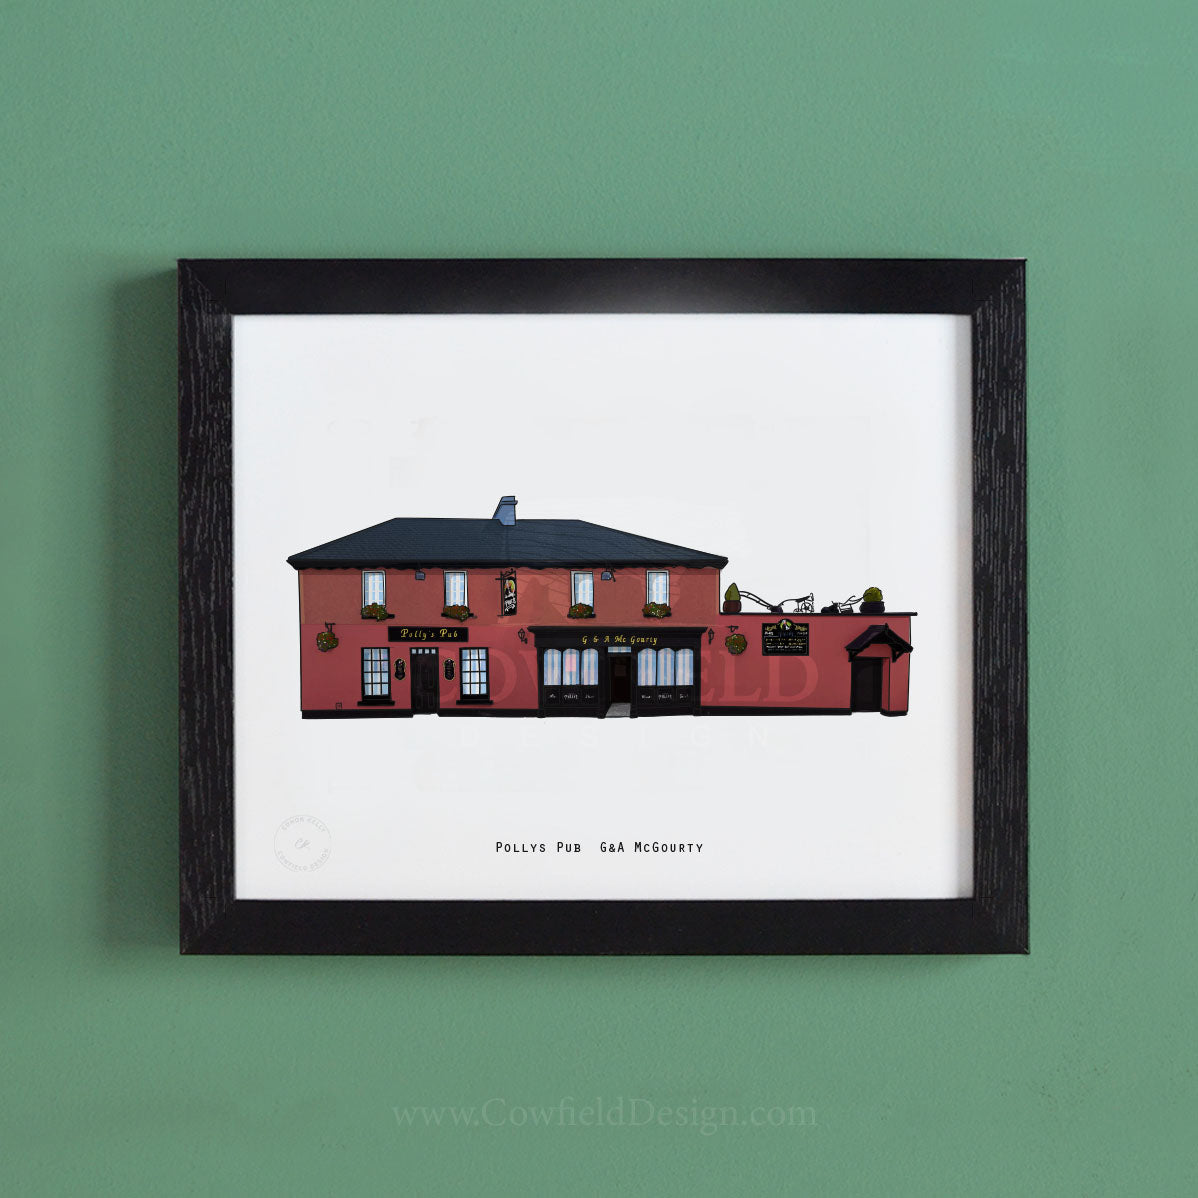 Pollys Pub, G &A McGourty - Tipperary Requested Pubs 6th